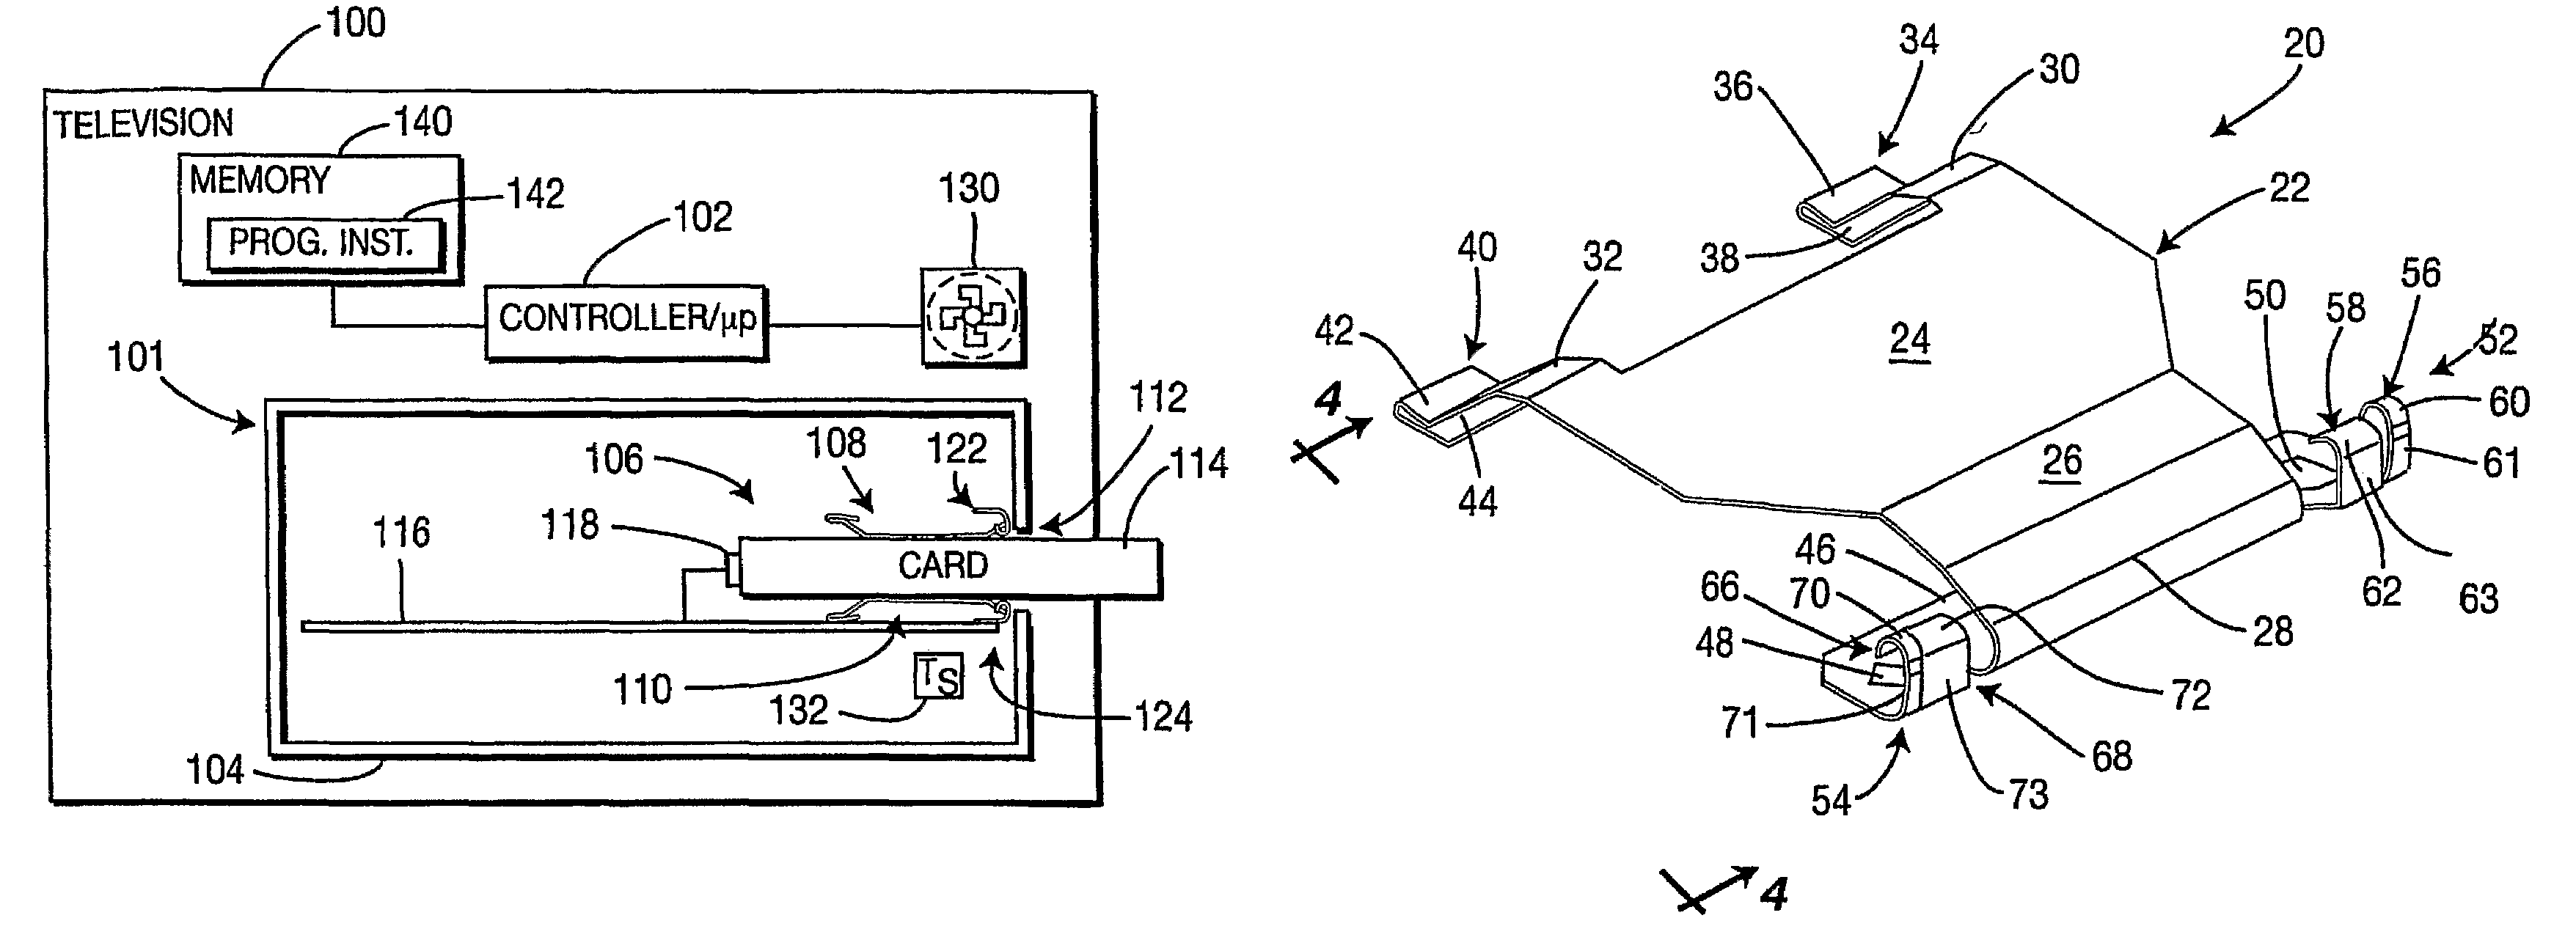 Electromagnetic interference shield and heat sink apparatus